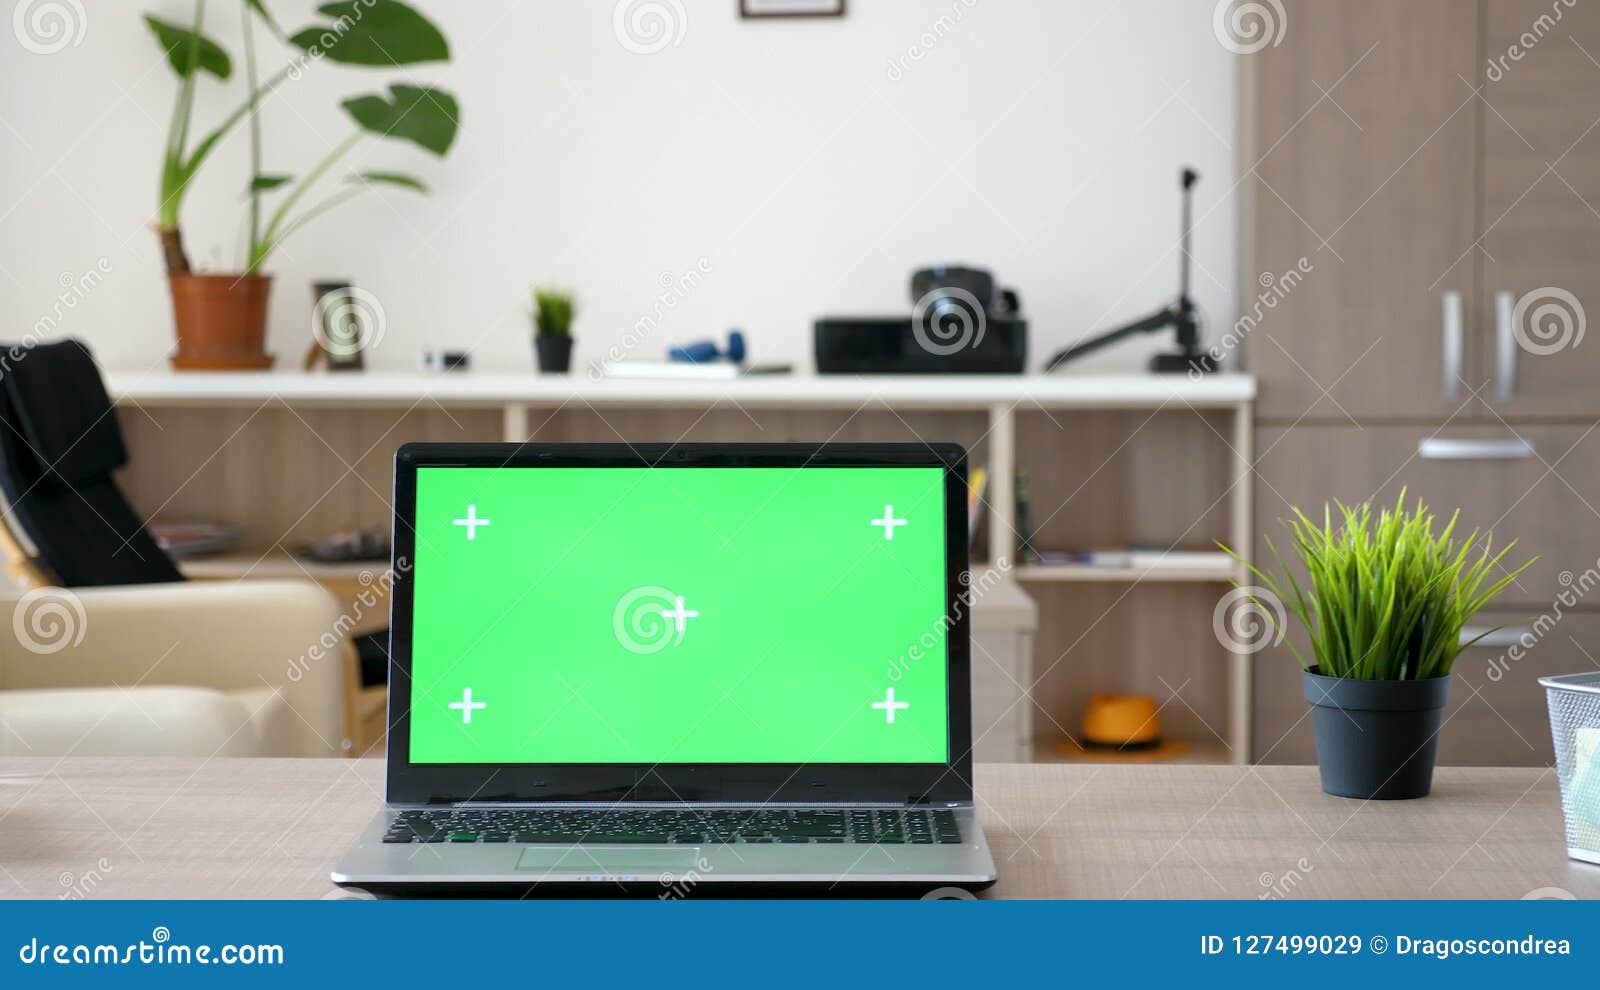 Laptop Computer With Green Screen Mock Up On A Desk In The Middle